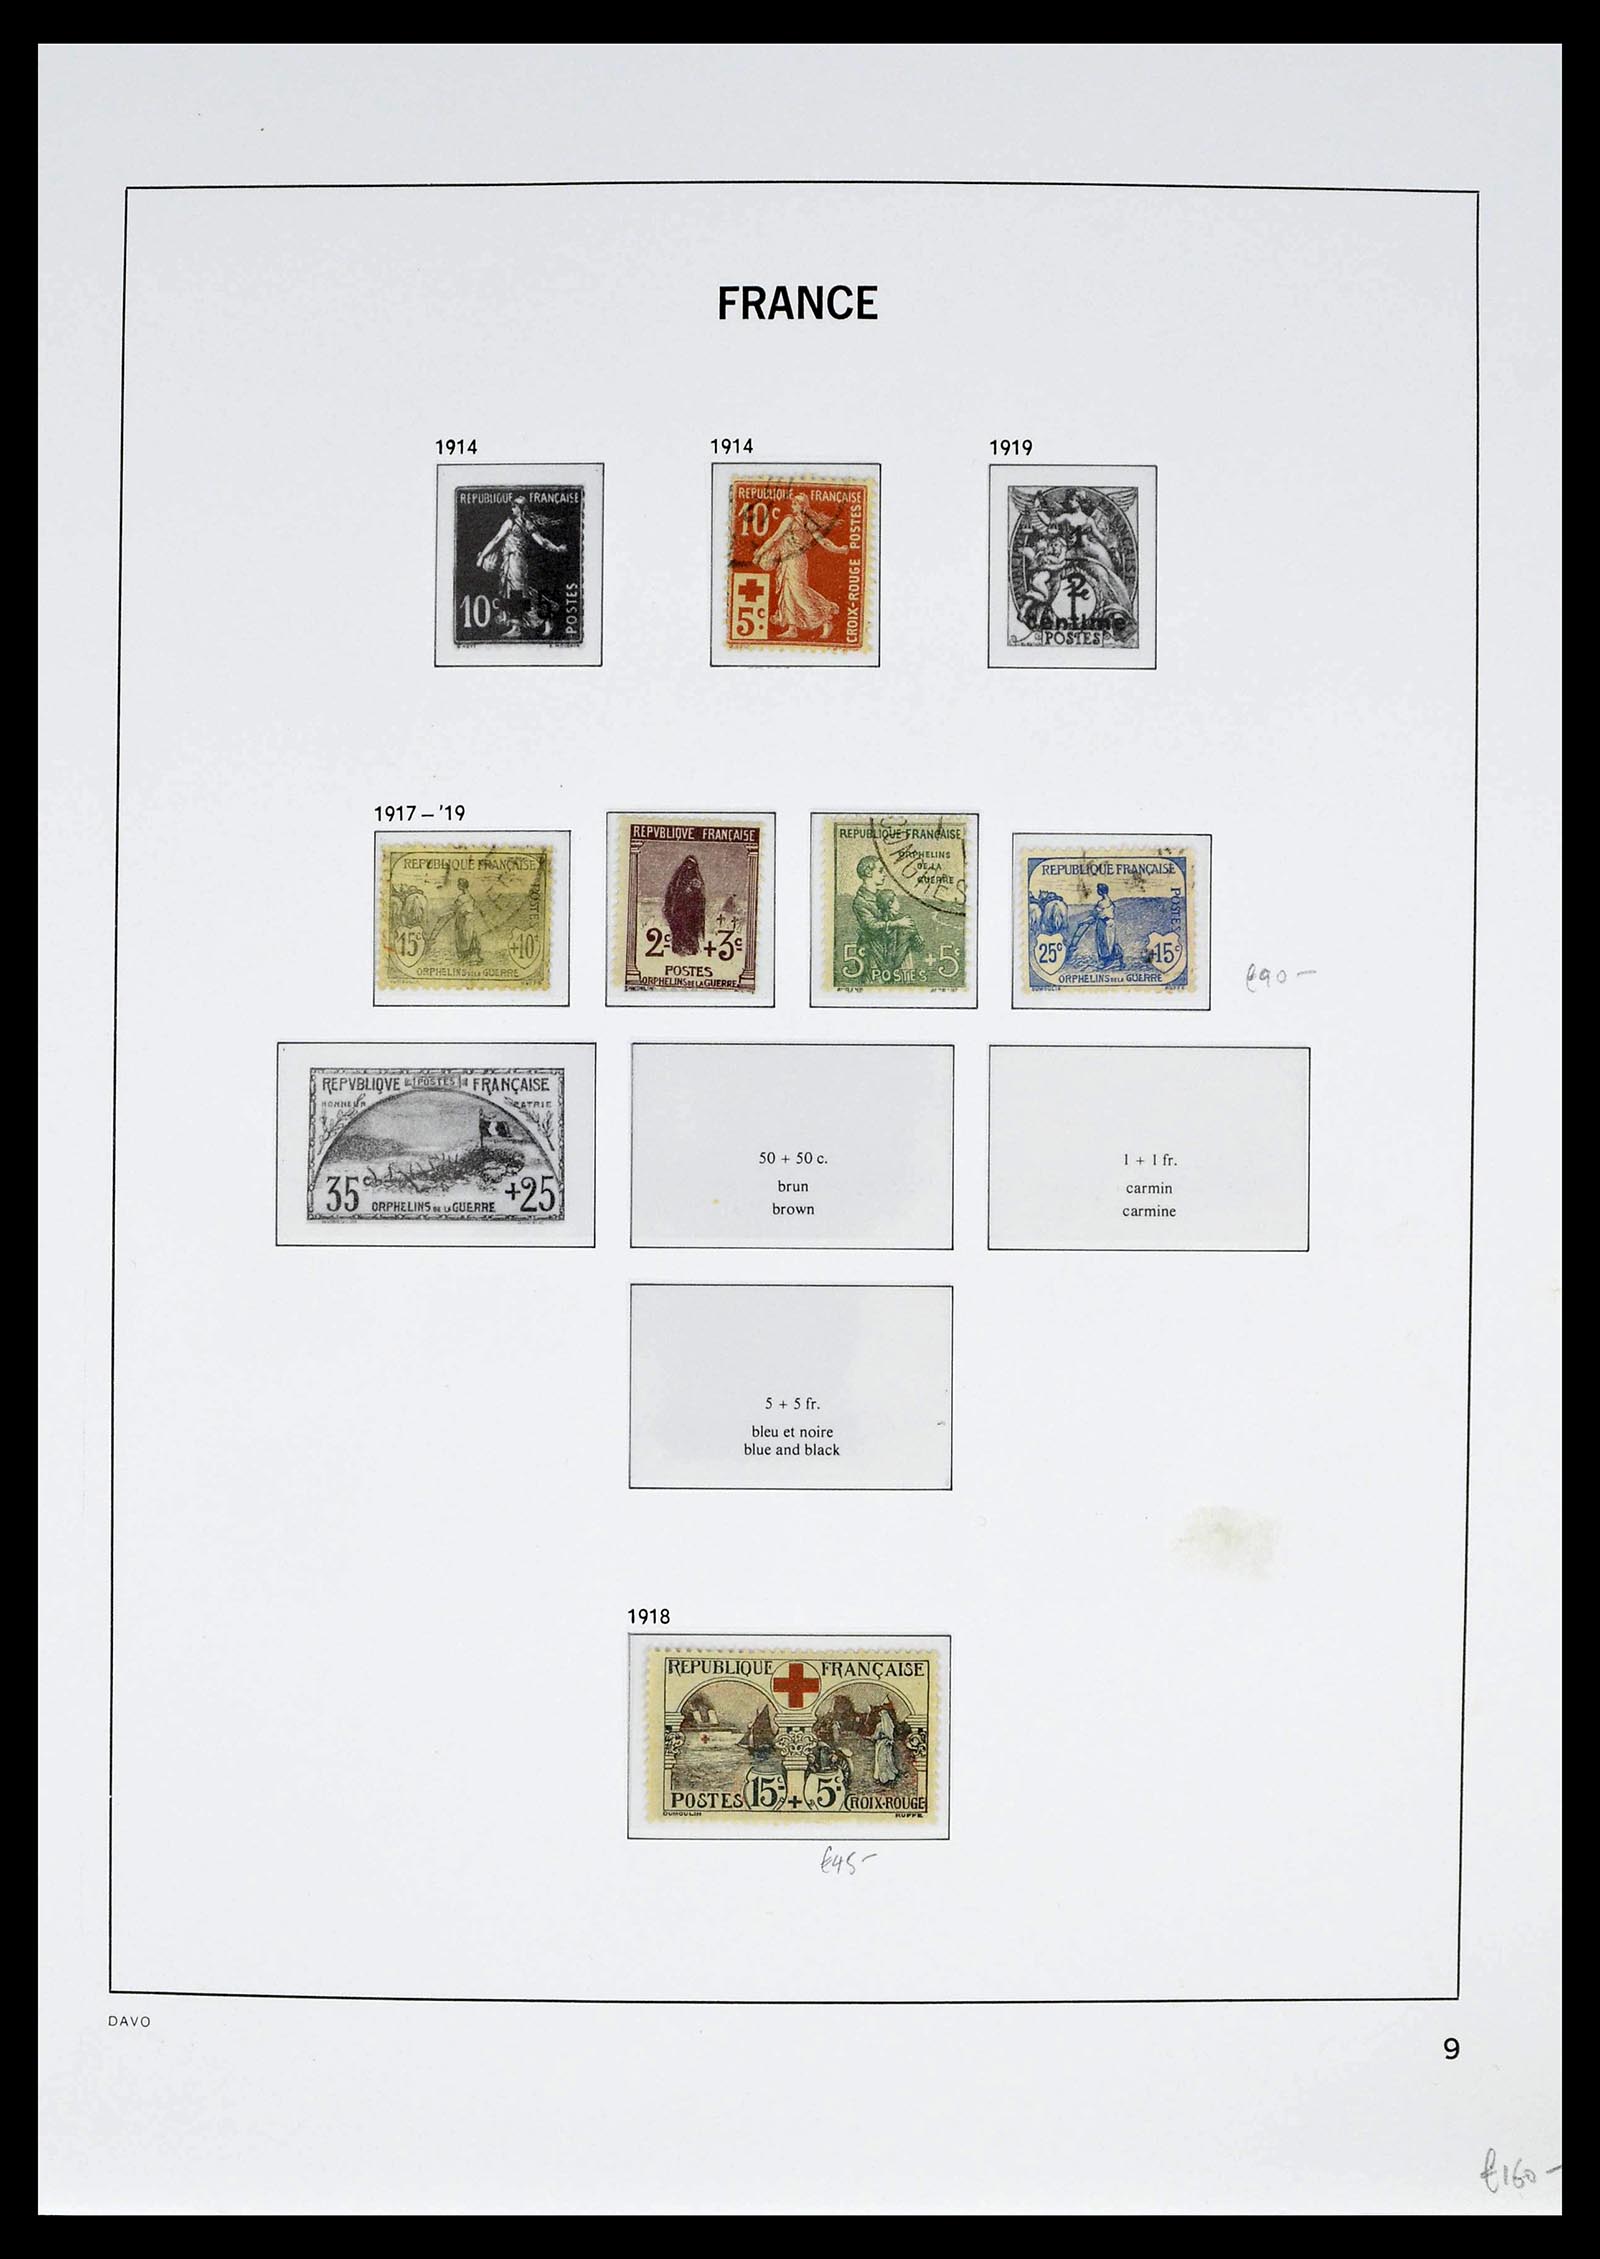 39335 0022 - Stamp collection 39335 France 1849-1969.